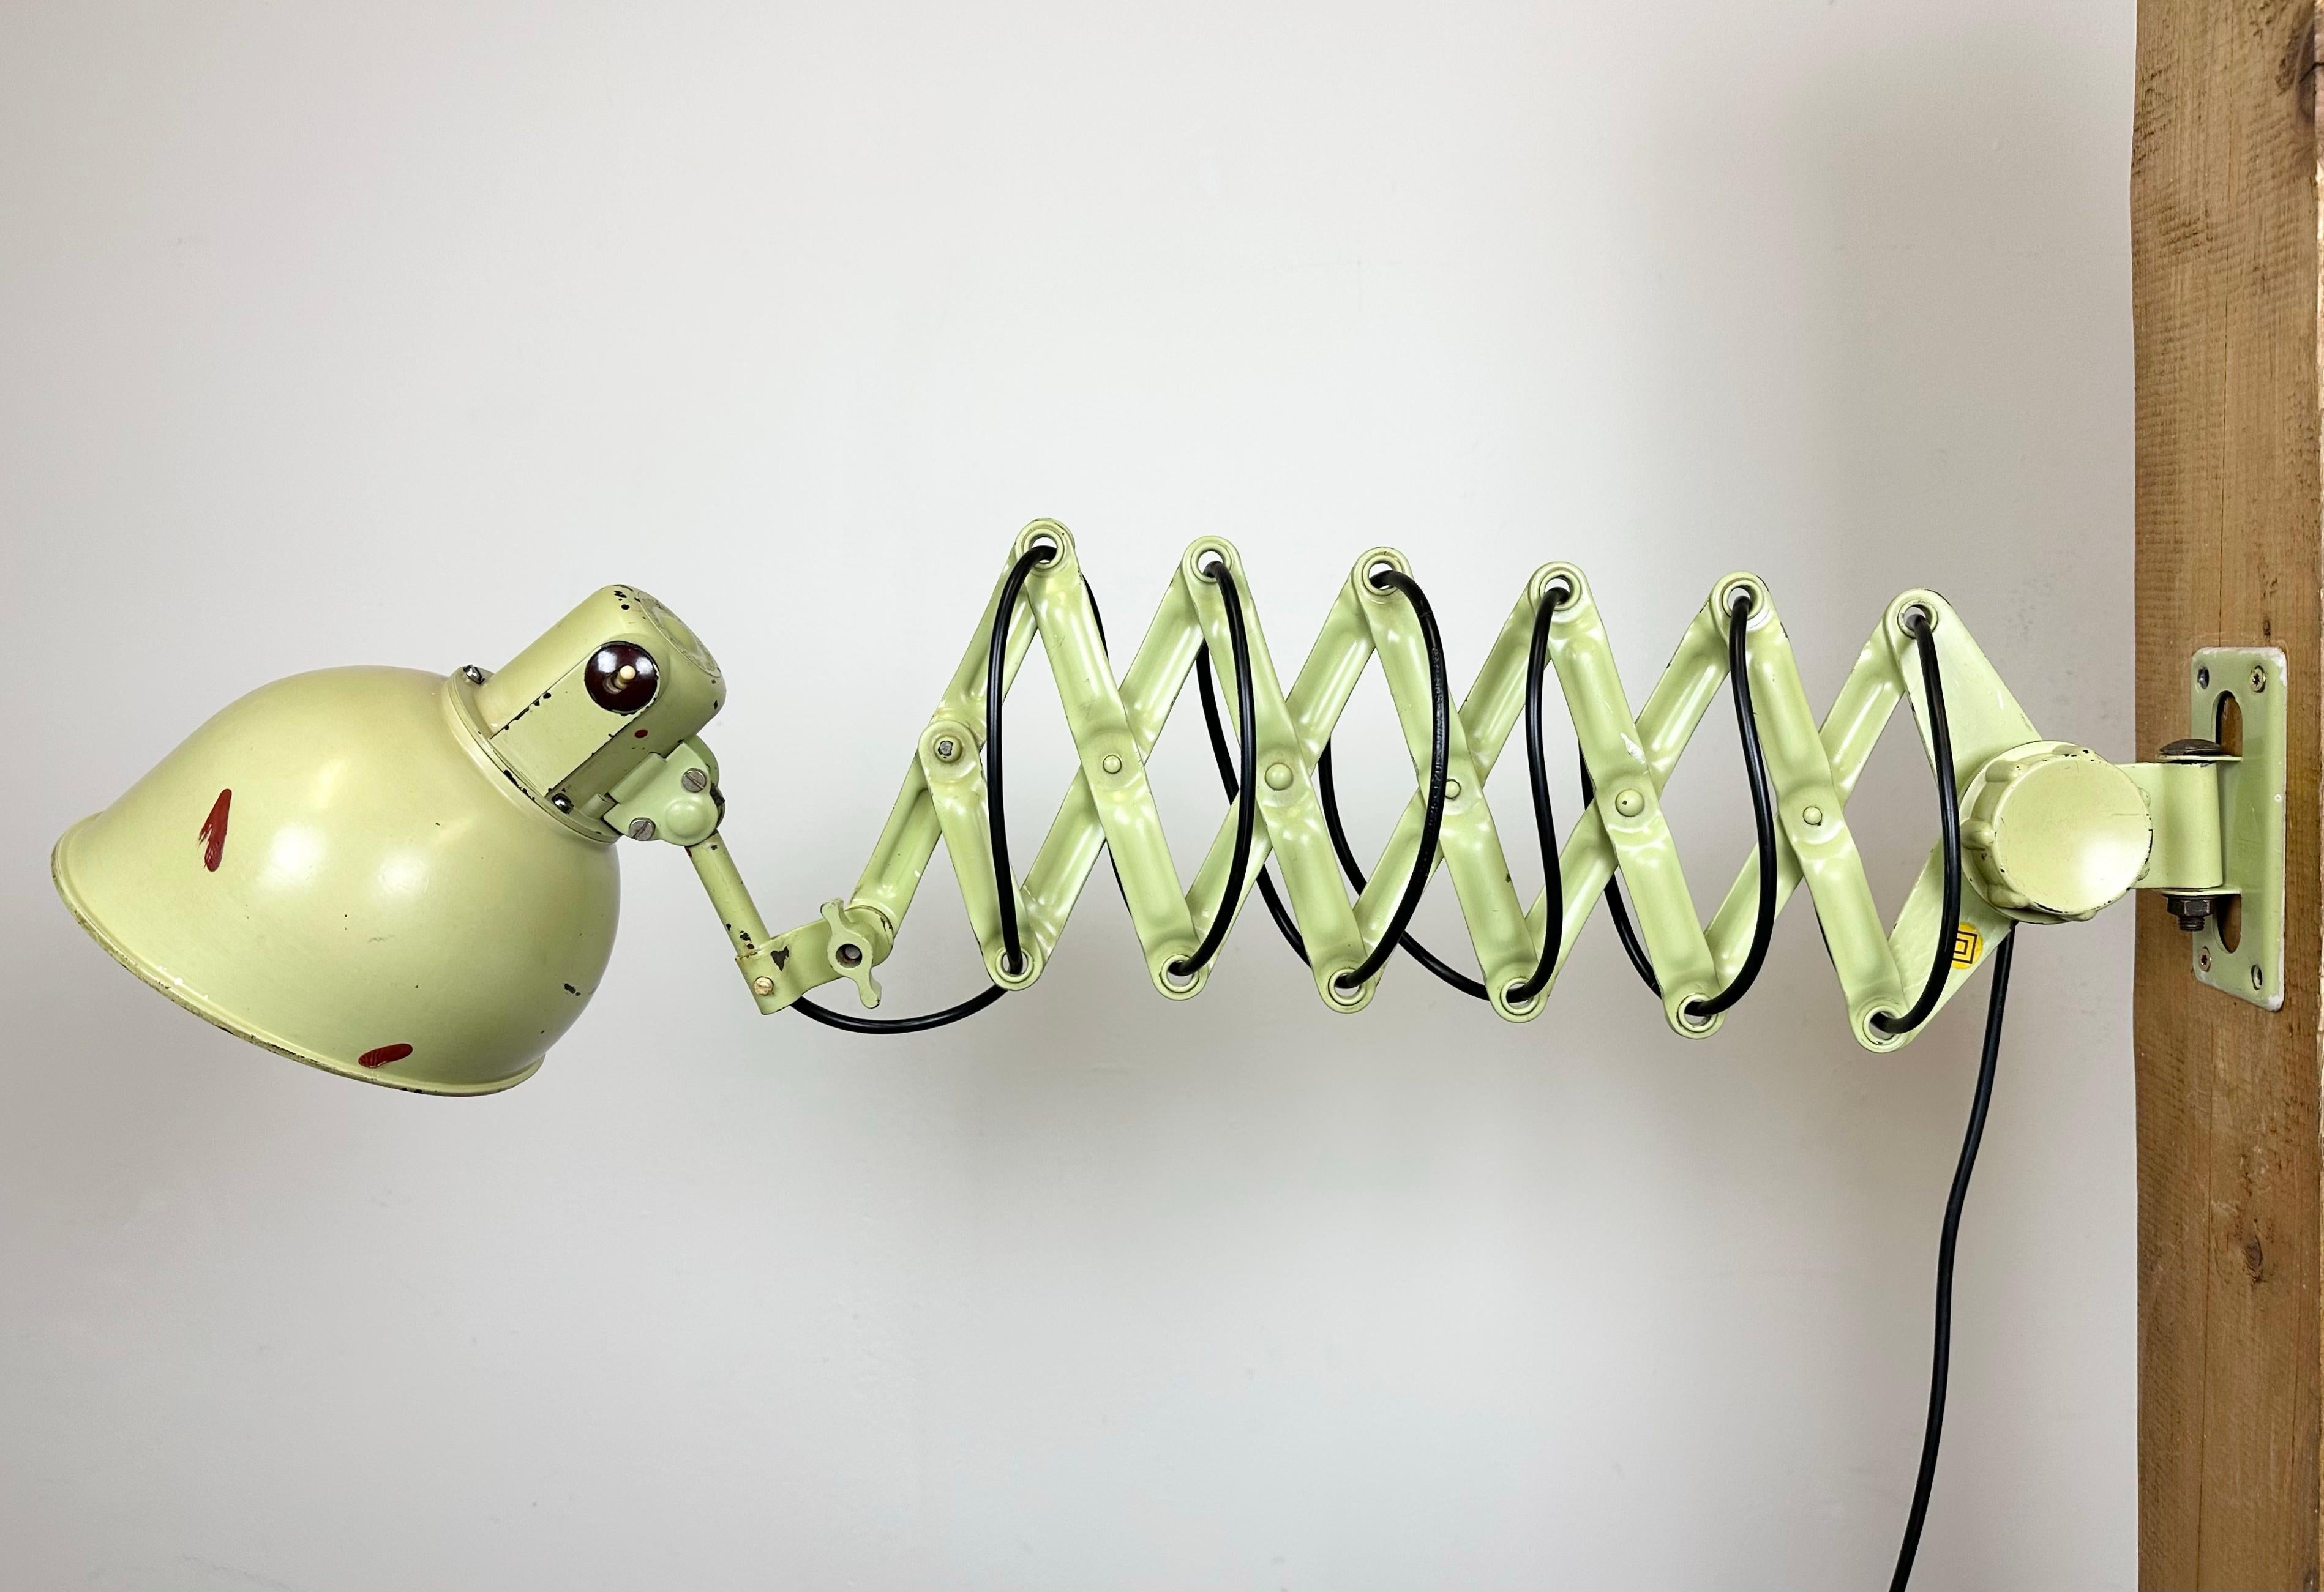 This vintage industrial scissor lamp was produced by REIF DRESDEN in former East Germany during the 1960s. The lamp has a green bakelite shade. Green iron scissor arm is extendable and can be turned sideways. The original socket requires E27/E26